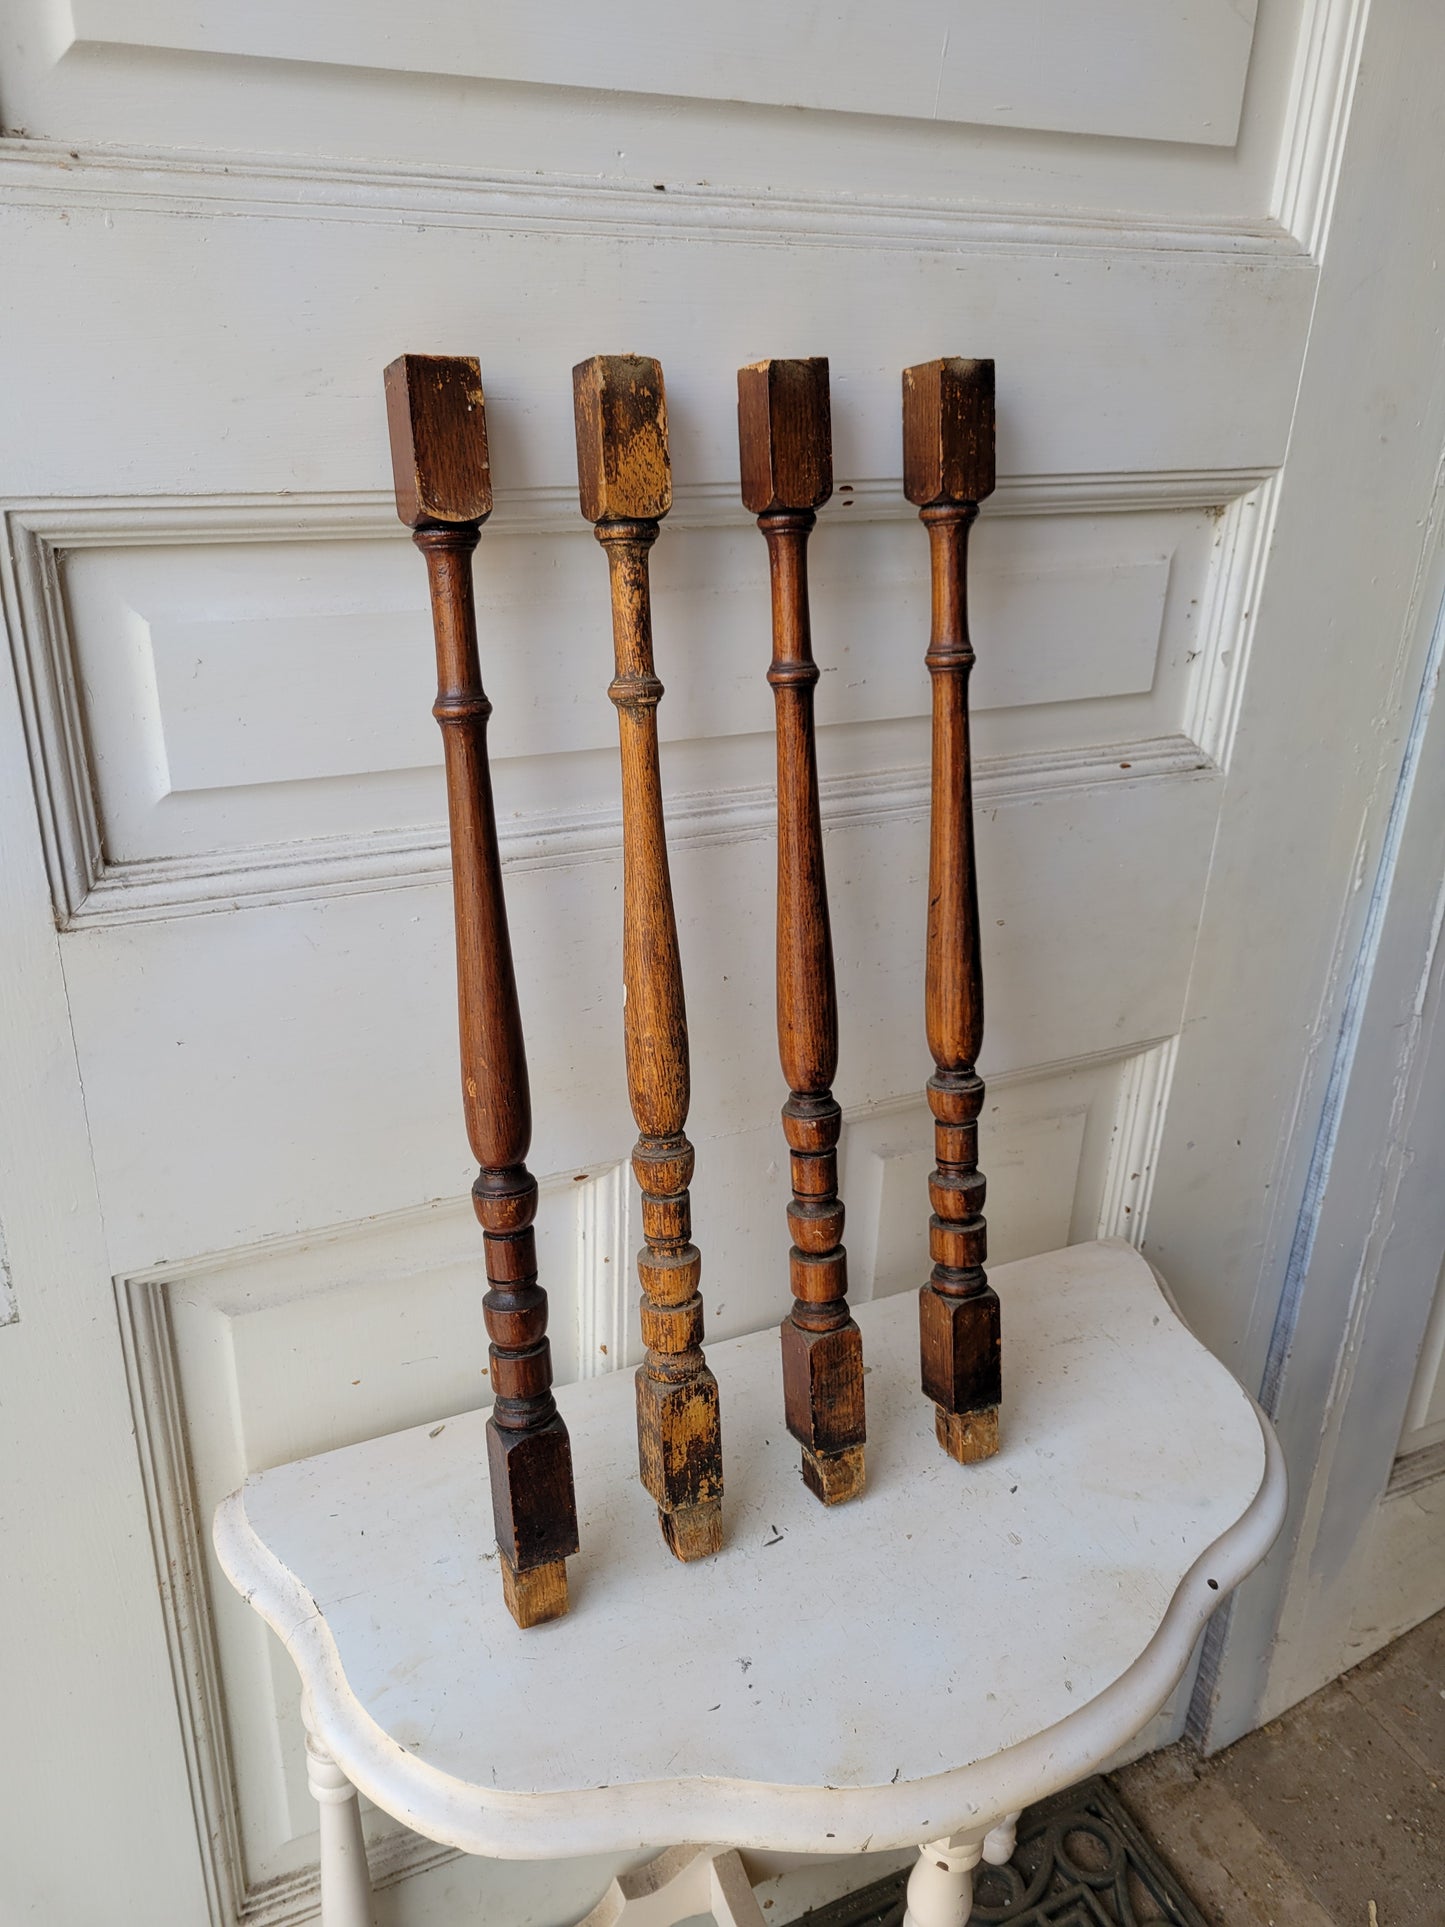 Eleven Antique Turned Wood Spindles, 11 Victorian Staircase Spindles